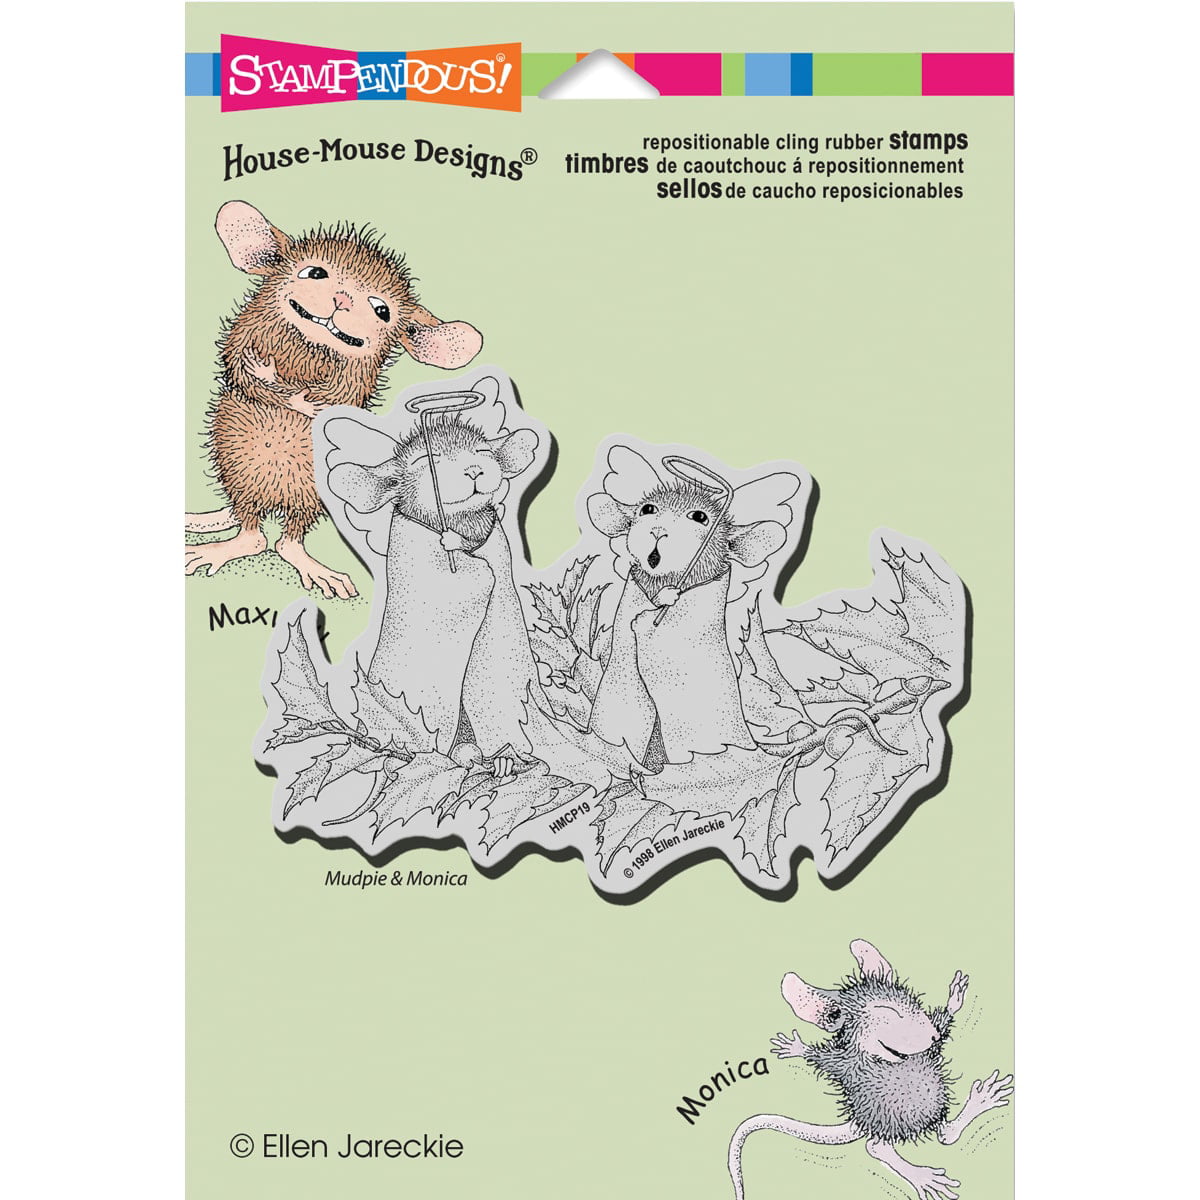 Buy Stampendous, Cling Rubber Stamp, Train Postcard Online at